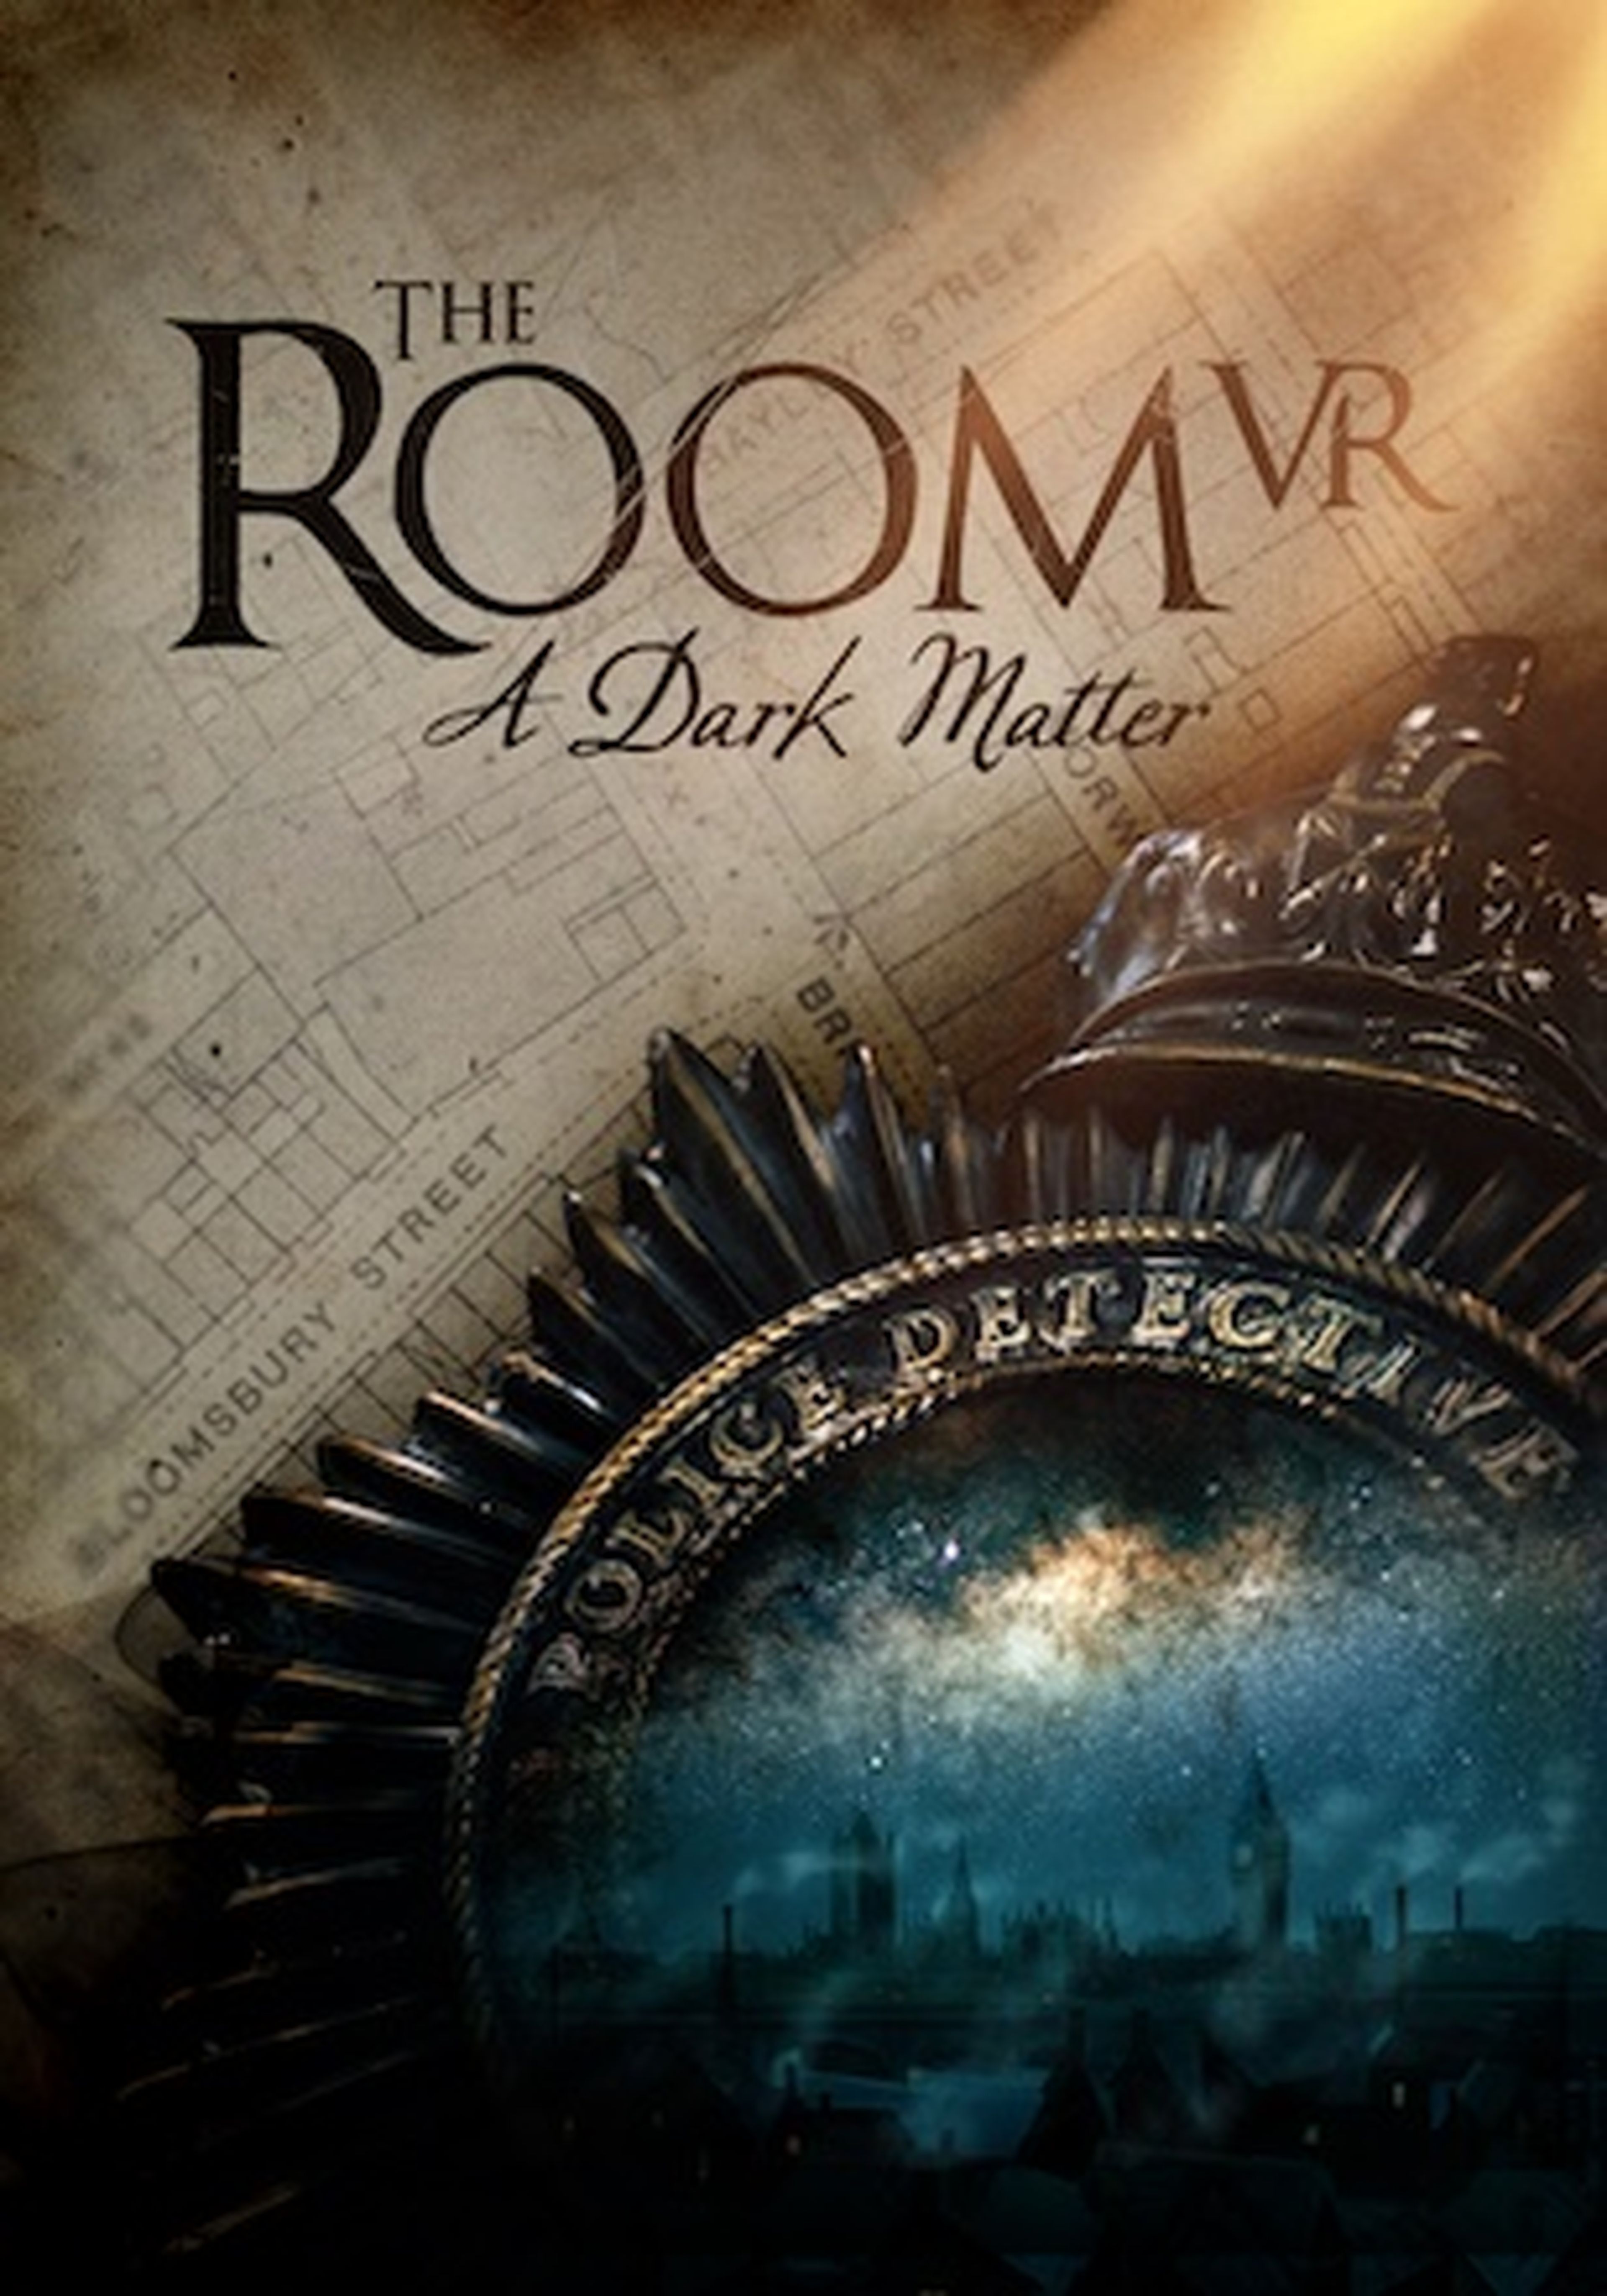 The room poster